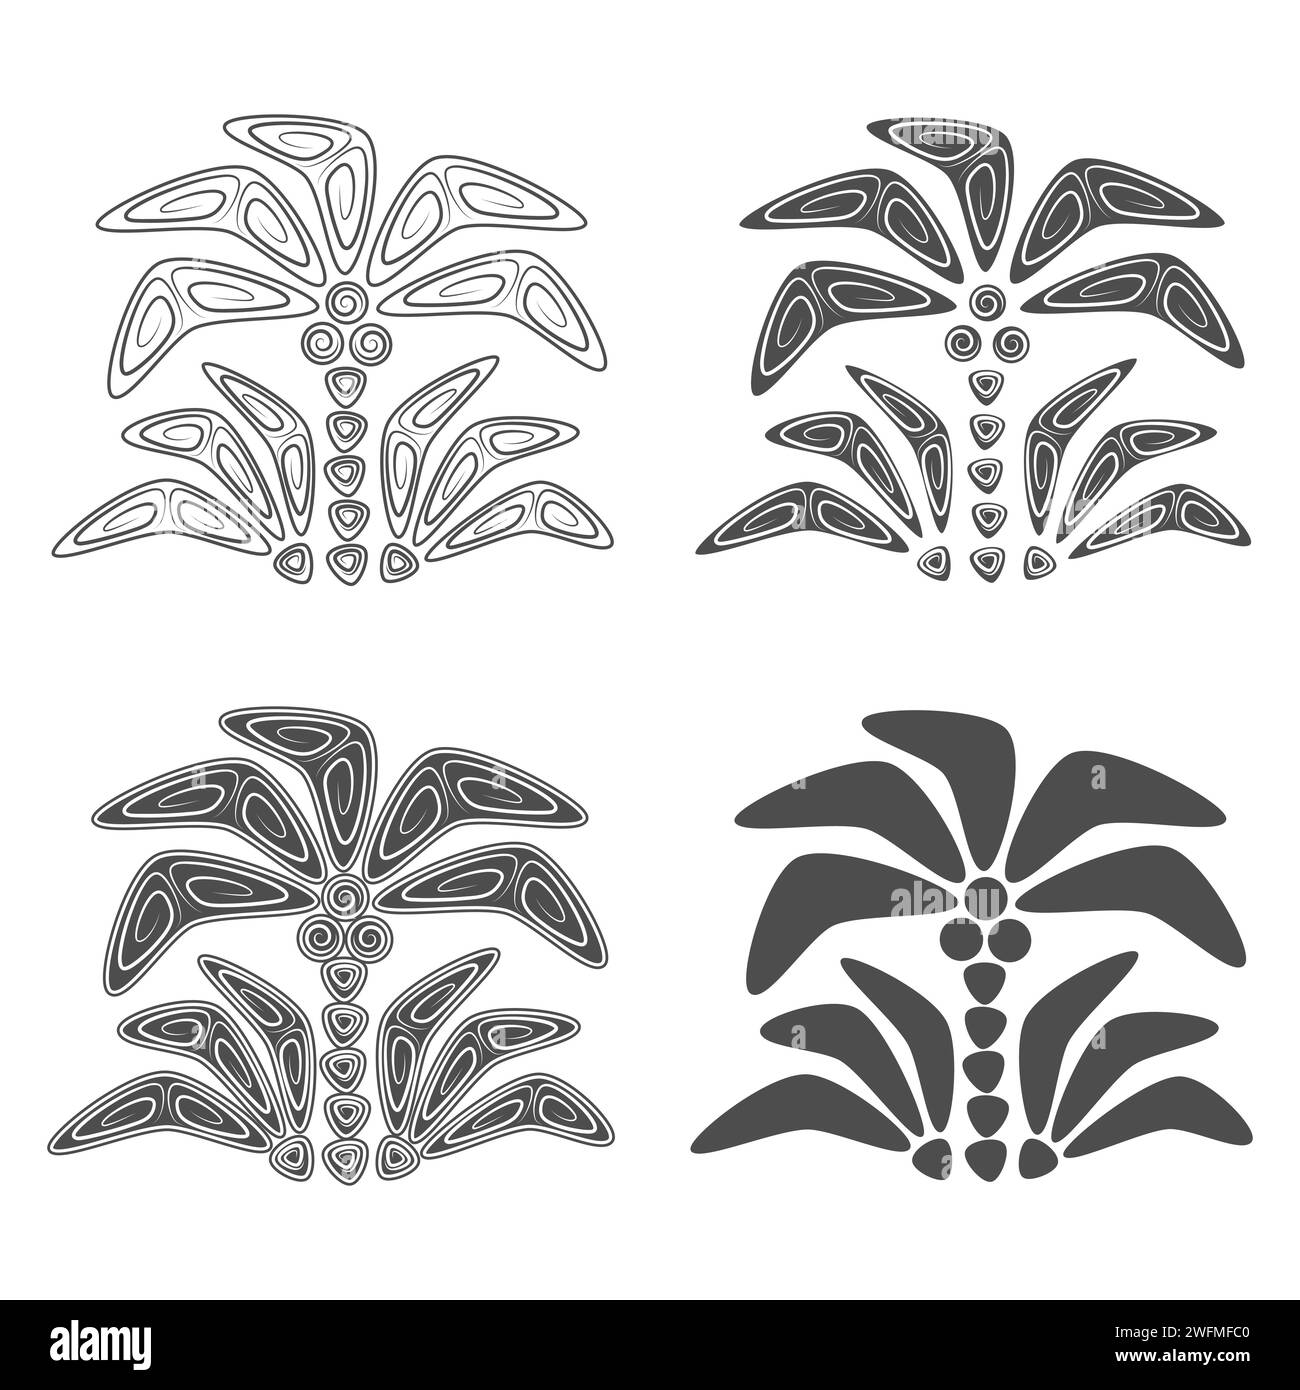 Abstract vector illustration with tropical palm tree. Black and white isolated objects in polynesia style on white background. Stock Vector